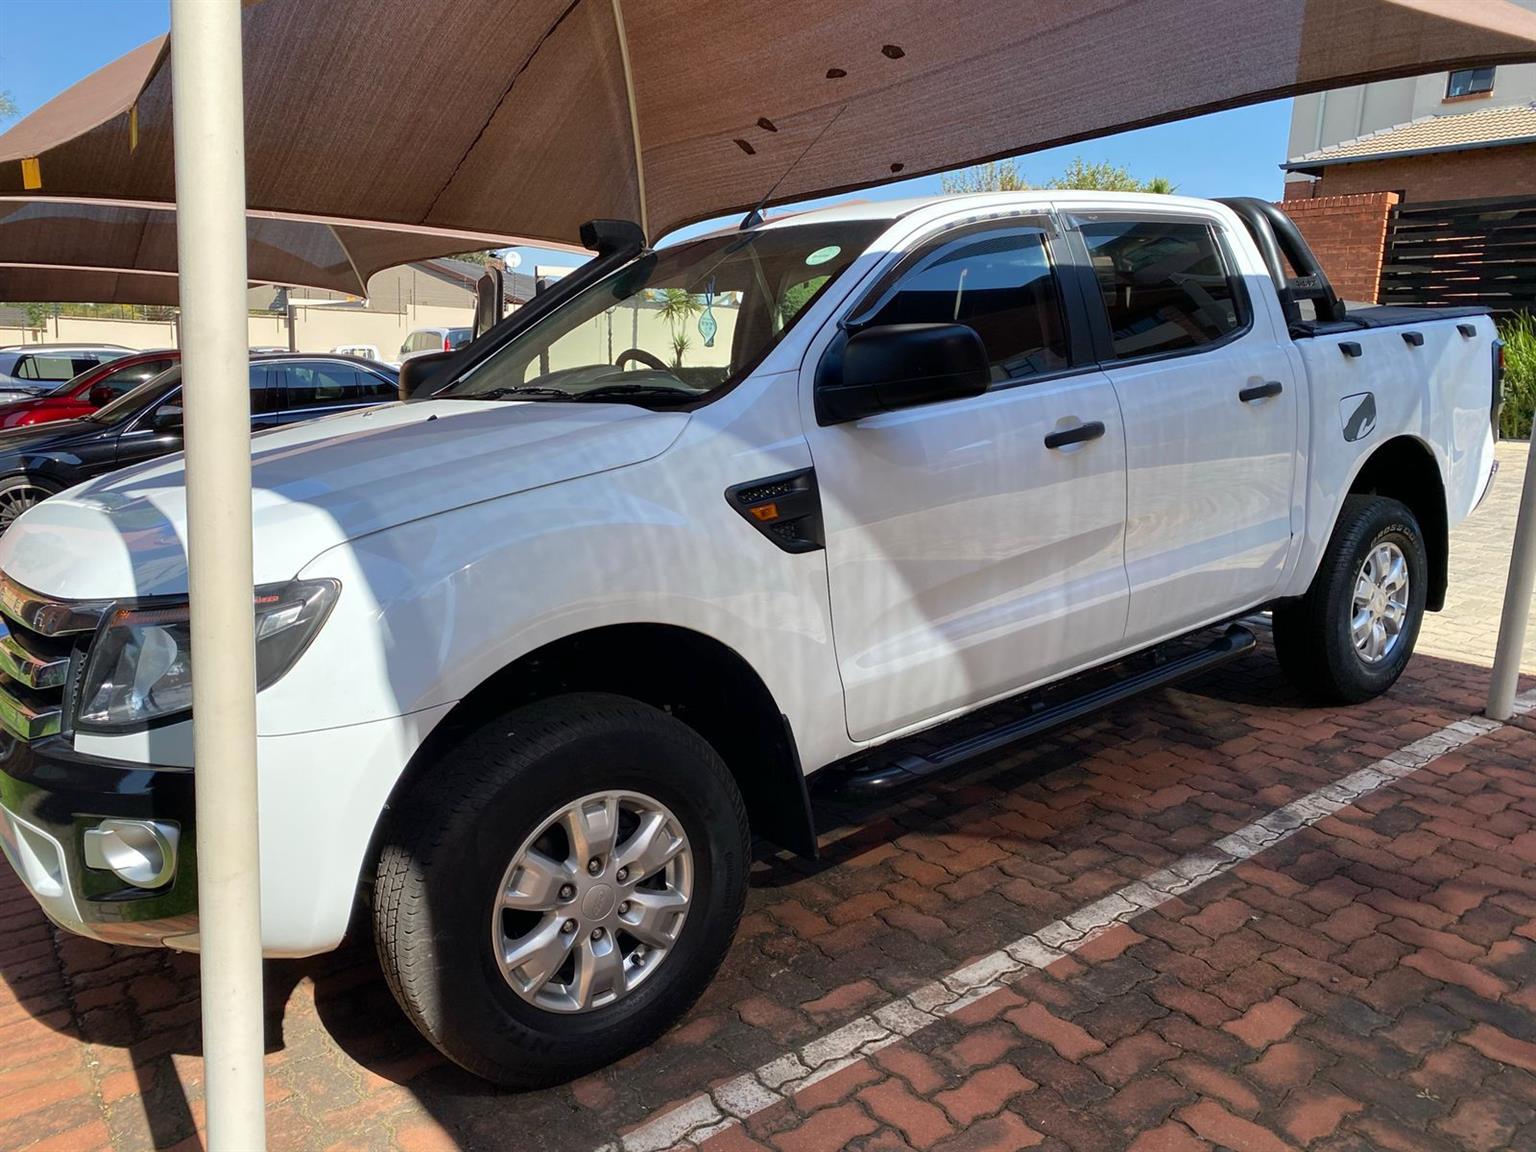 4x2 Ford Ranger in Crisp condition up for grabs.